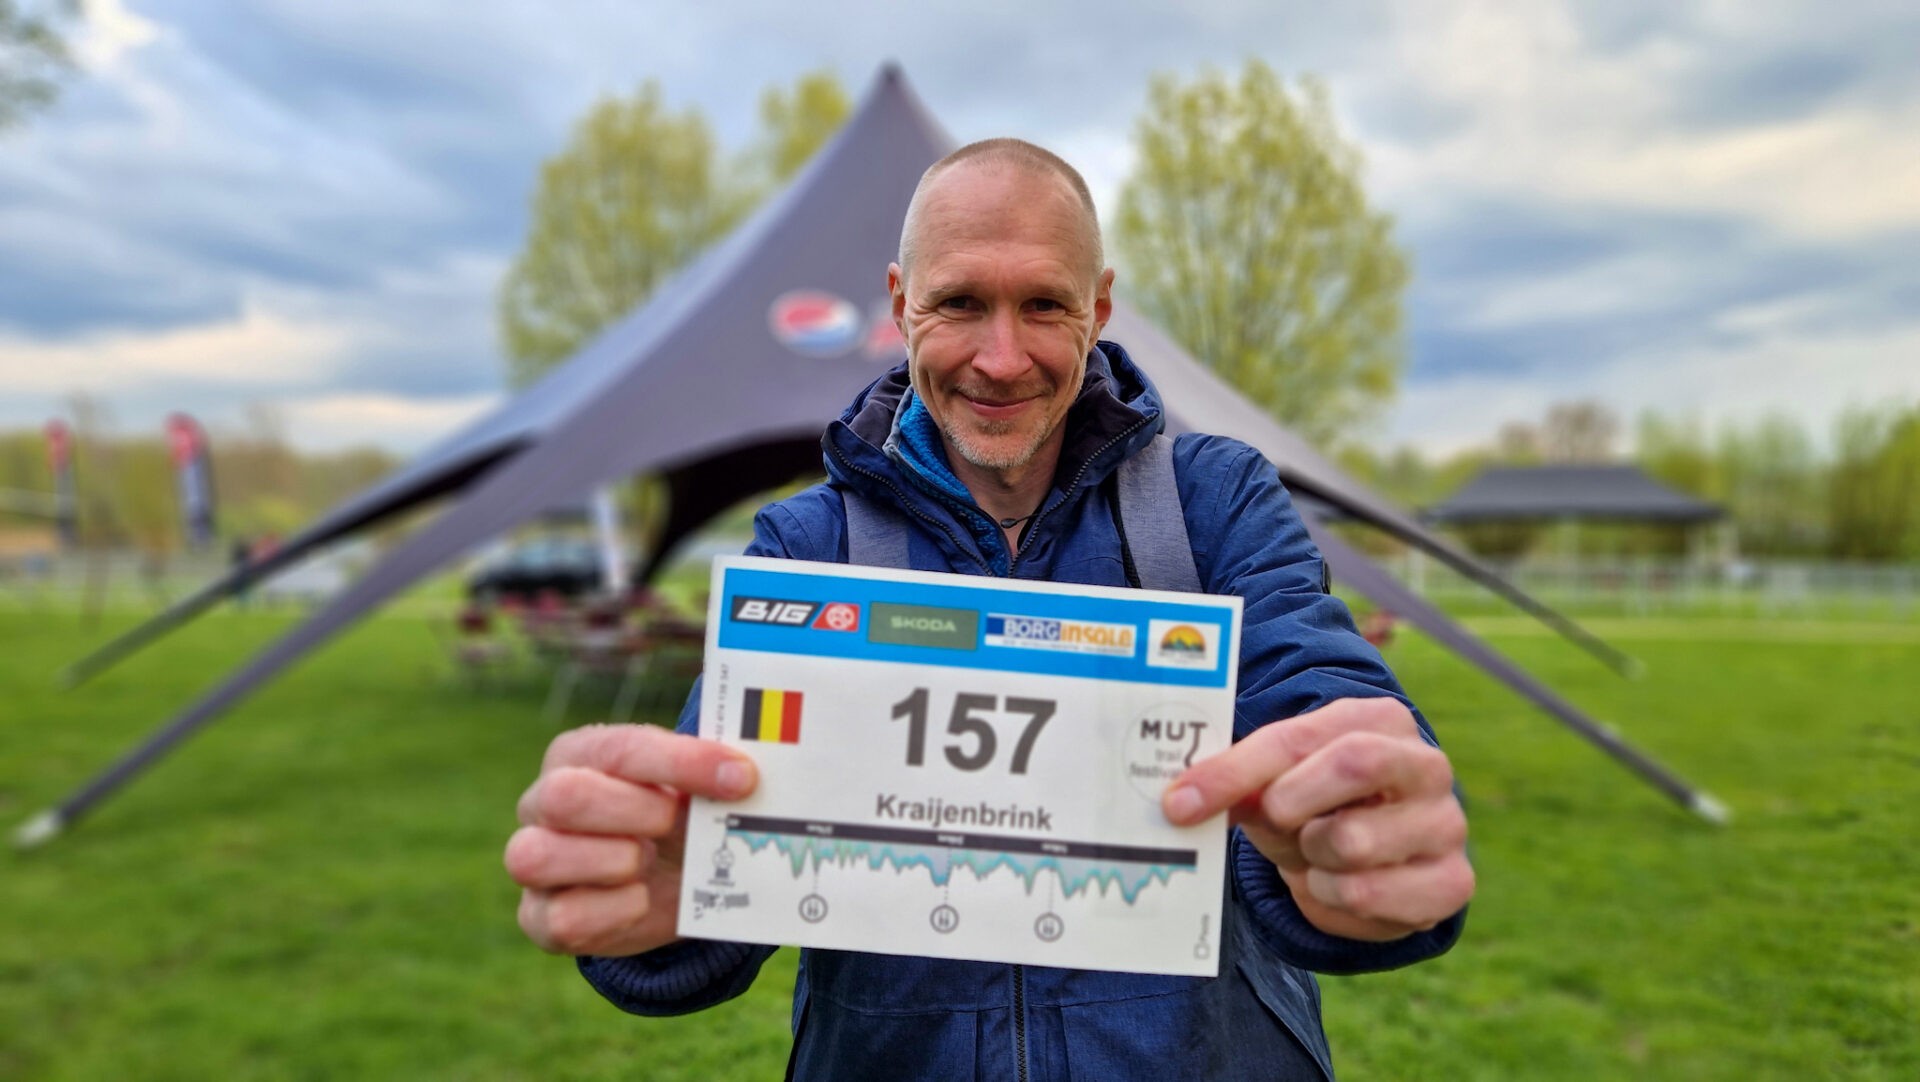 I am in Lierde, Belgium. I got my Bib number. Now I only need a race plan for the Mighty Marathon of tomorrow. A race plan and polenta. 